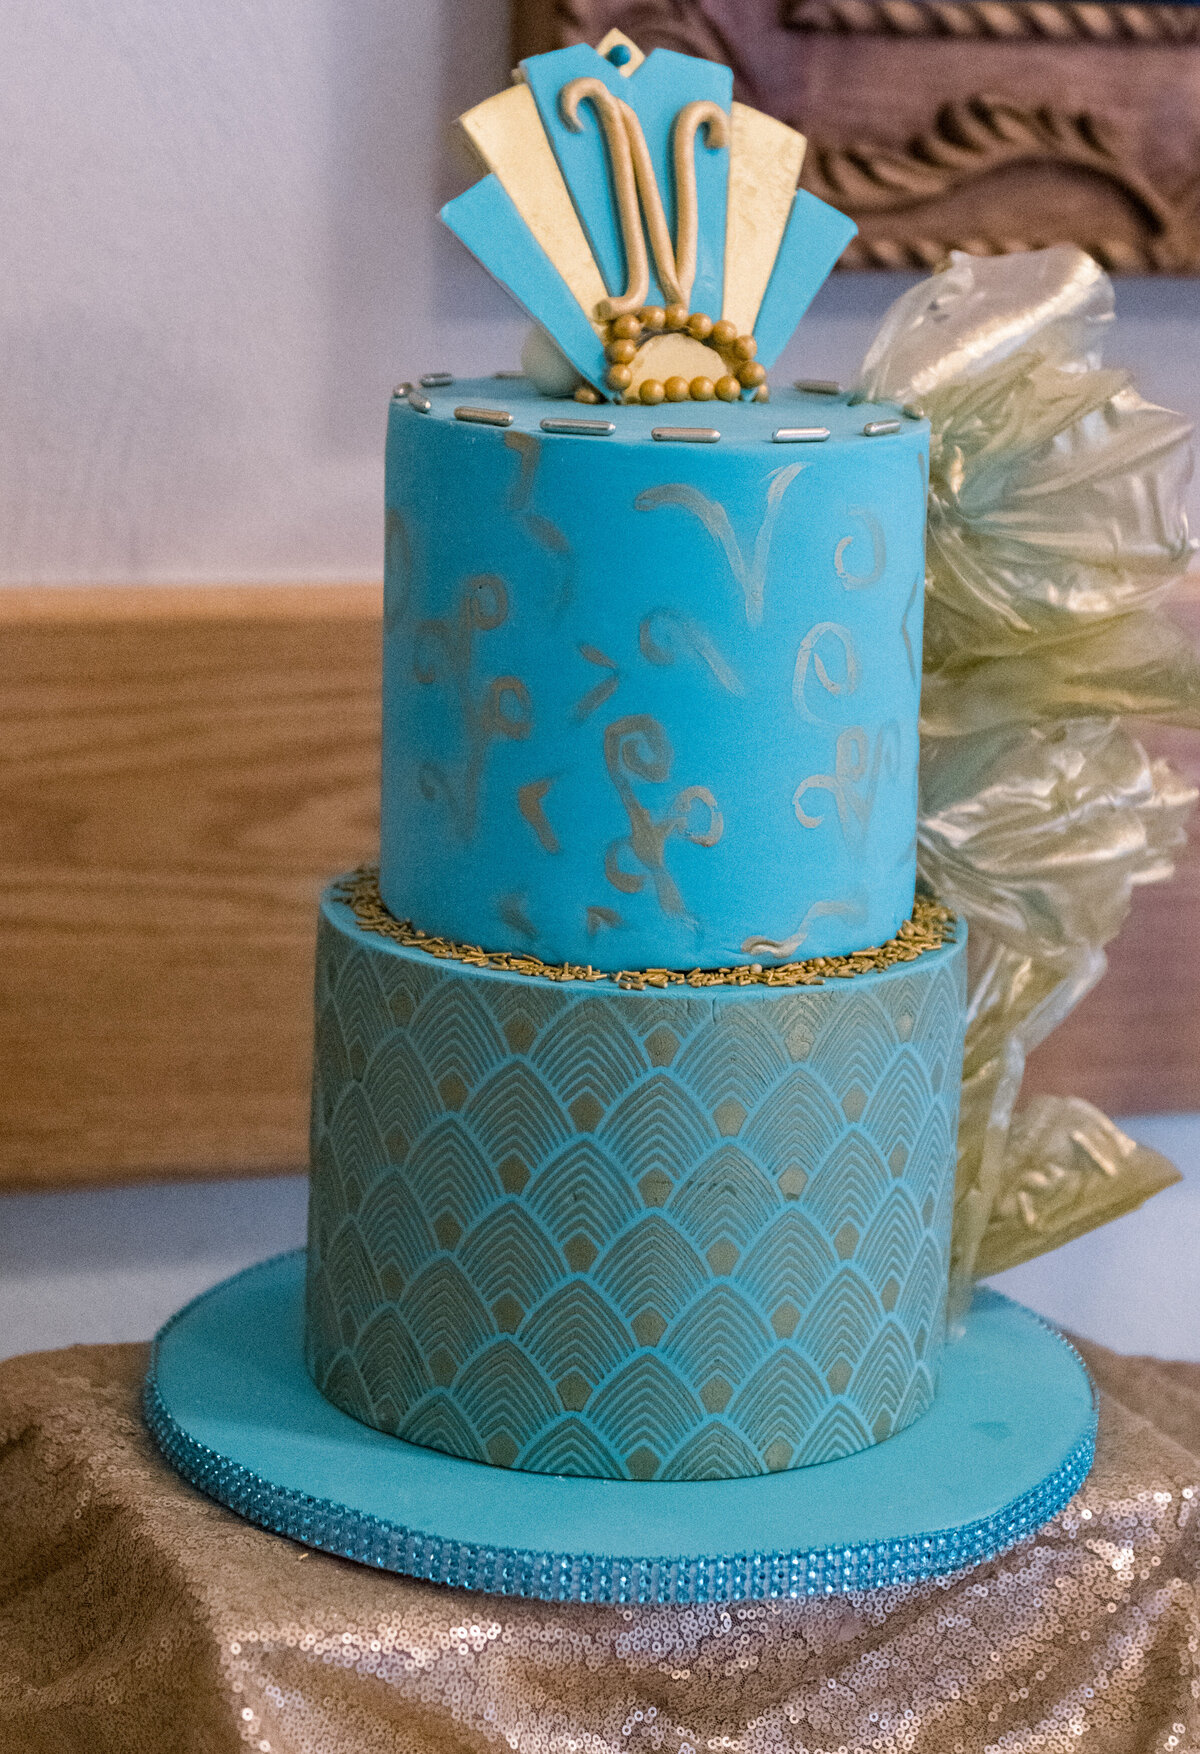 Art deco design 2 tier cake. in teal and gold. Art deco fan stencil on bottom tier; handpainted abstract lines on top tier; art deco fan monogram  cake topper. Rice paper gold sails on side edge of cake